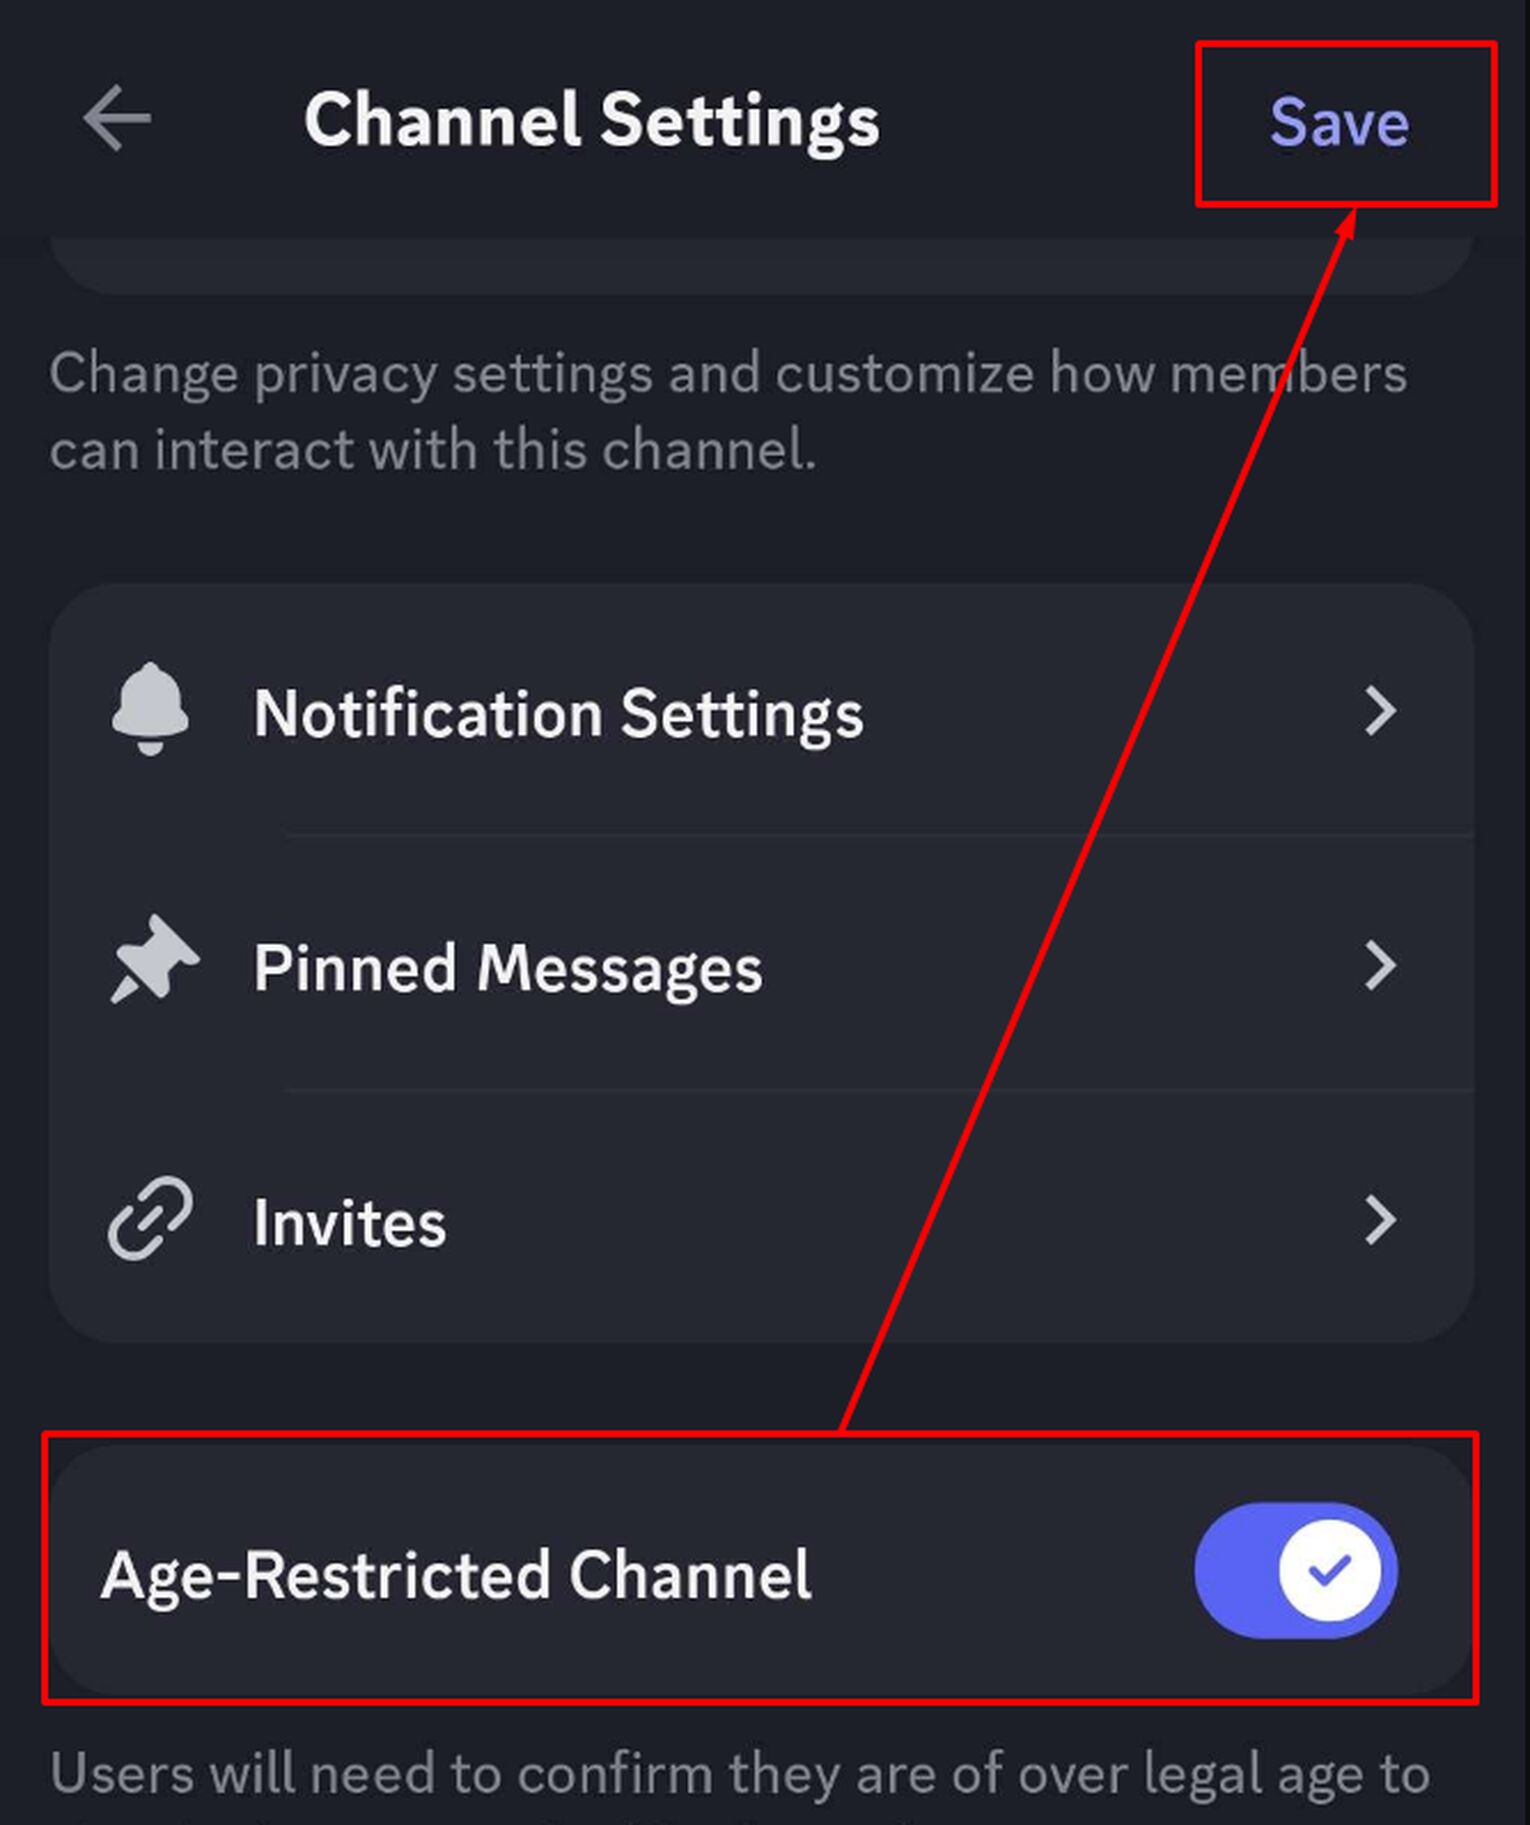 Enable “Age-Restricted Channel”